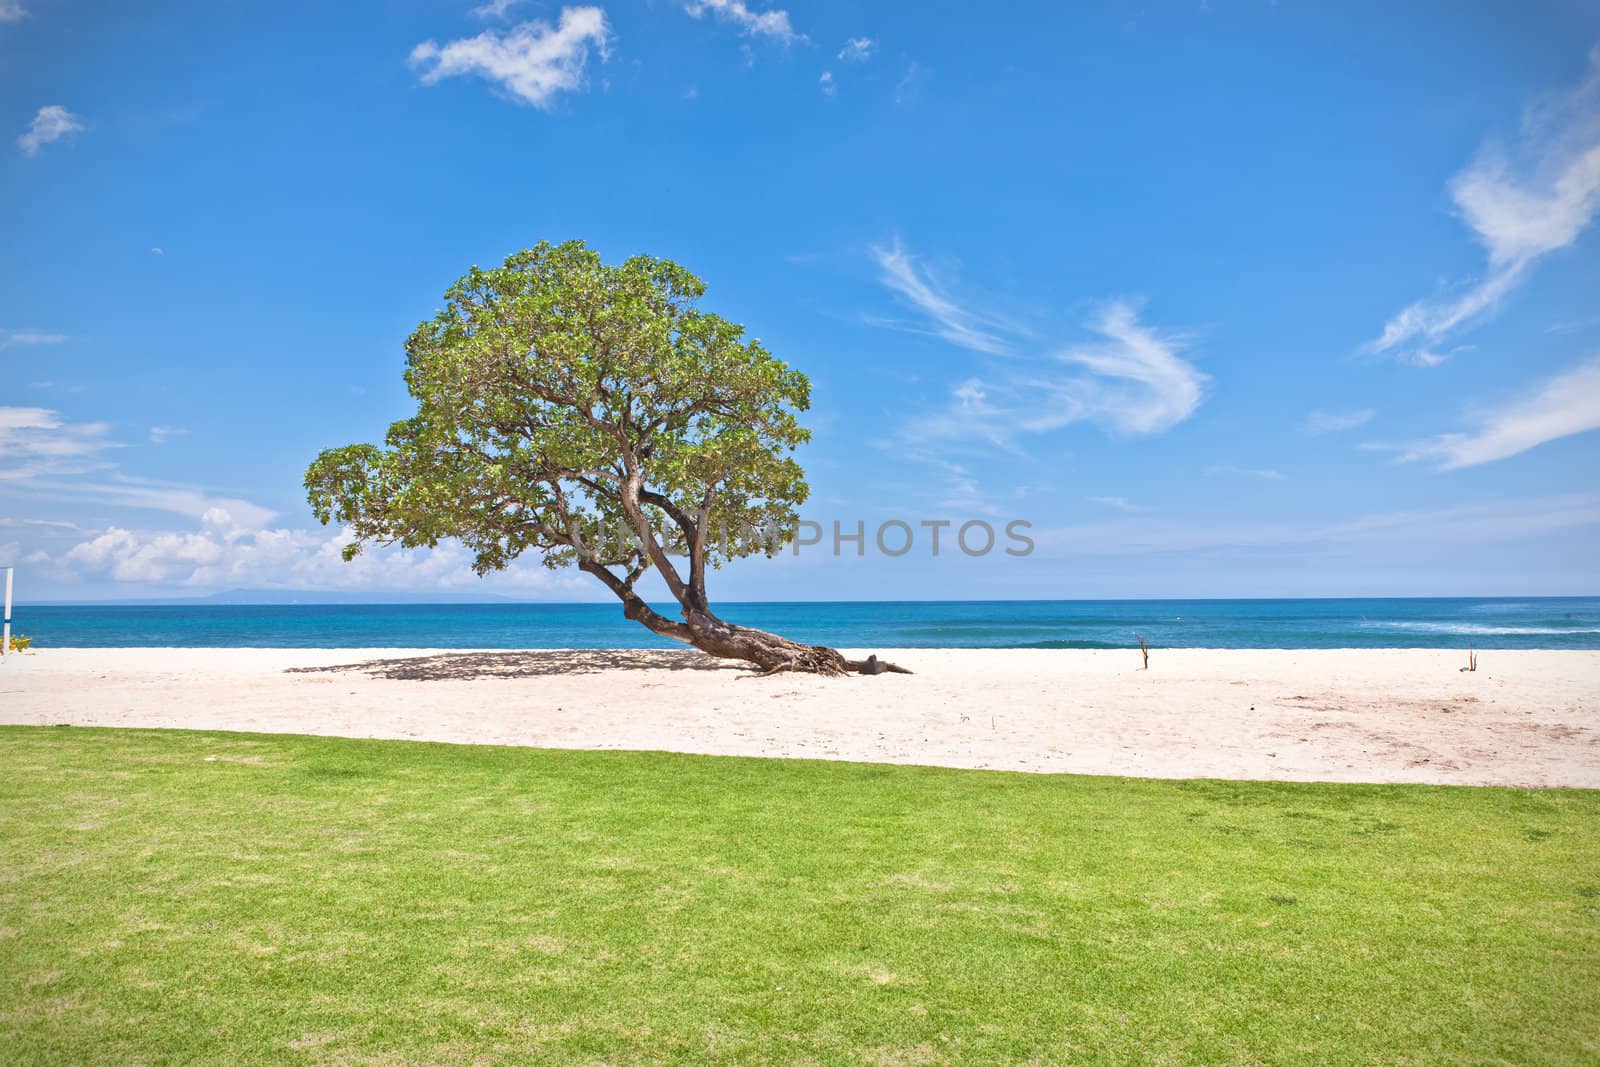 One green tree growing on a deserted beach